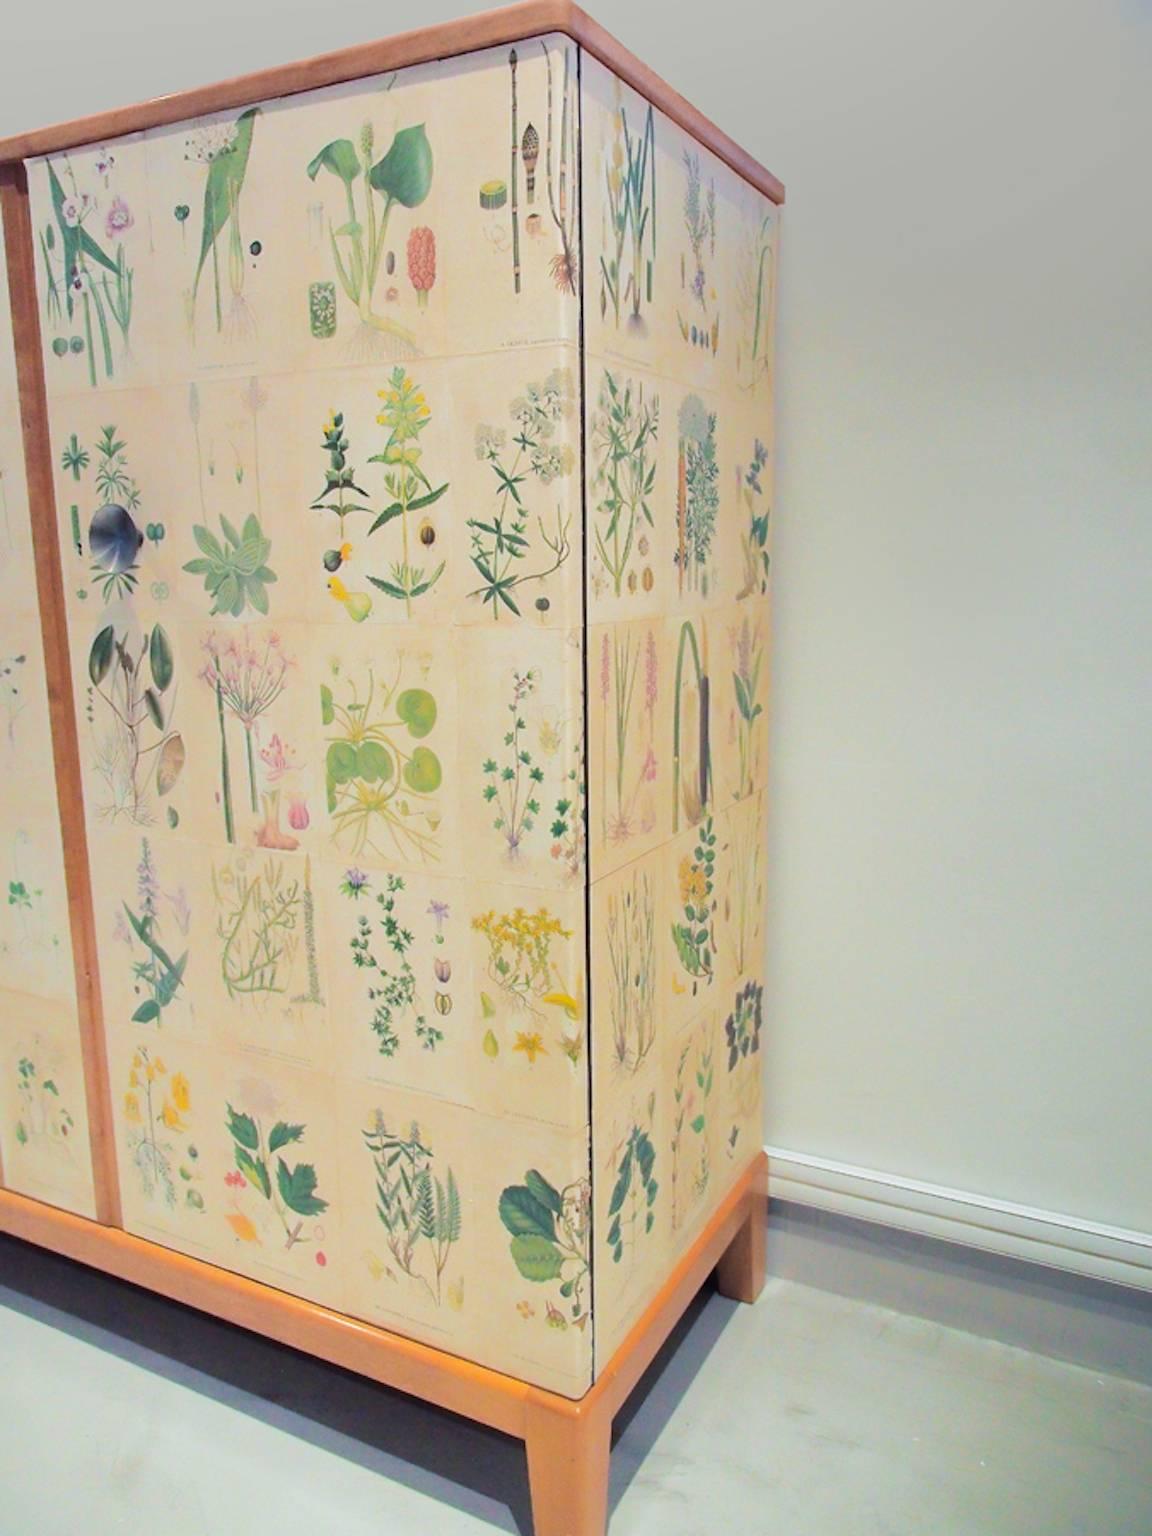 Scandinavian Modern Swedish Wooden Cabinet with Nordern Flora Illustrations by C.A. Lindman